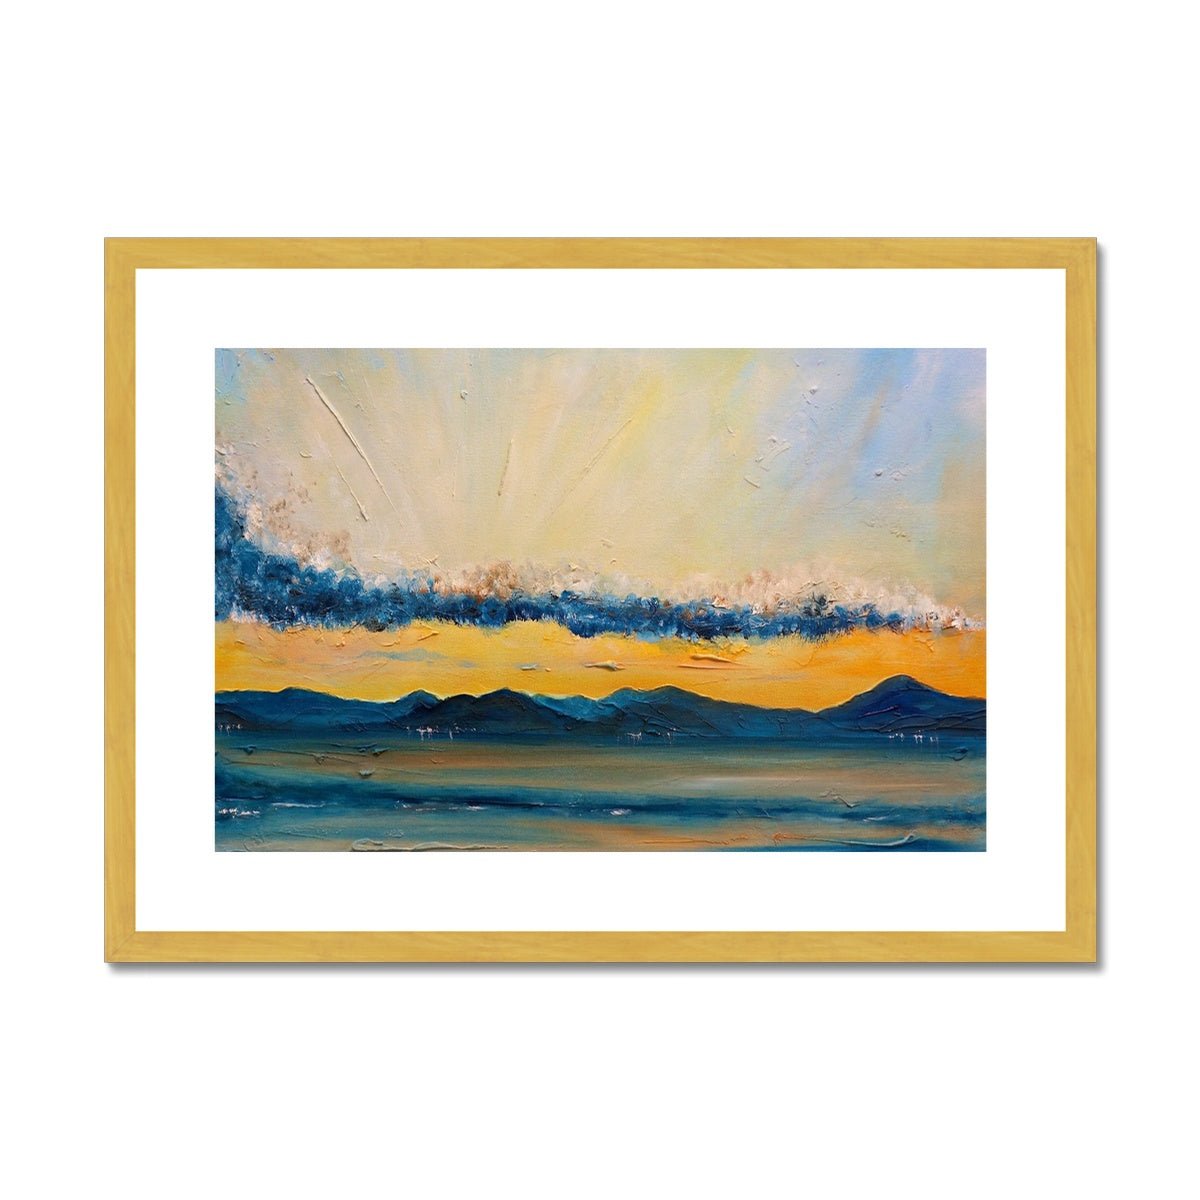 River Clyde From Skelmorlie Painting | Antique Framed & Mounted Prints From Scotland-Antique Framed & Mounted Prints-River Clyde Art Gallery-A2 Landscape-Gold Frame-Paintings, Prints, Homeware, Art Gifts From Scotland By Scottish Artist Kevin Hunter